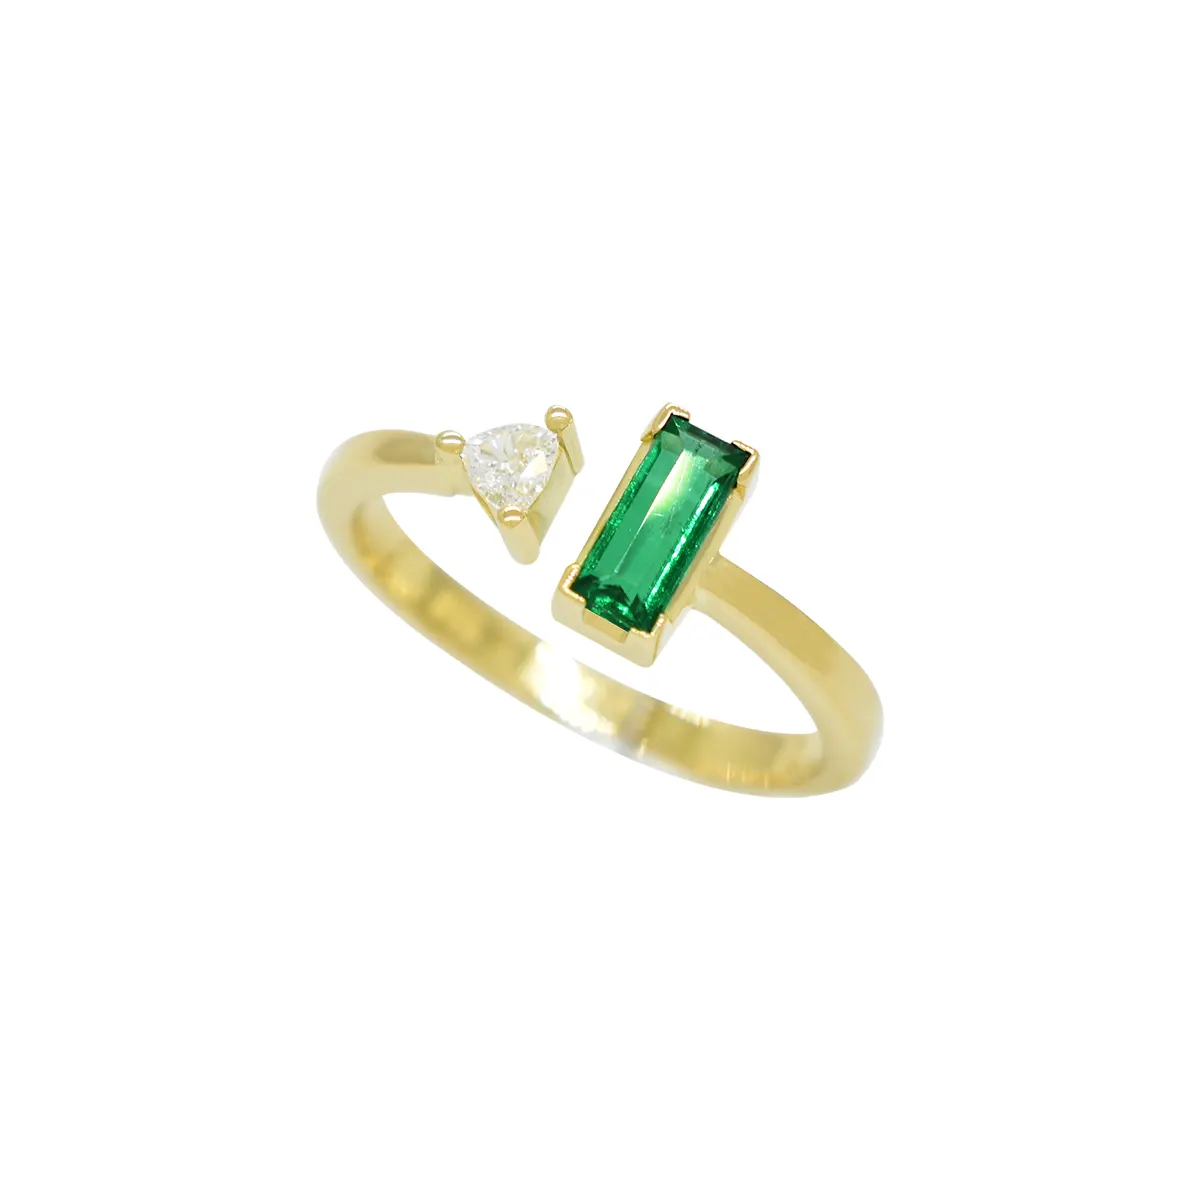 The emerald and diamond ring design features a cuff-like structure with an open center. This detail adds a modern and unique touch to the gemstone ring